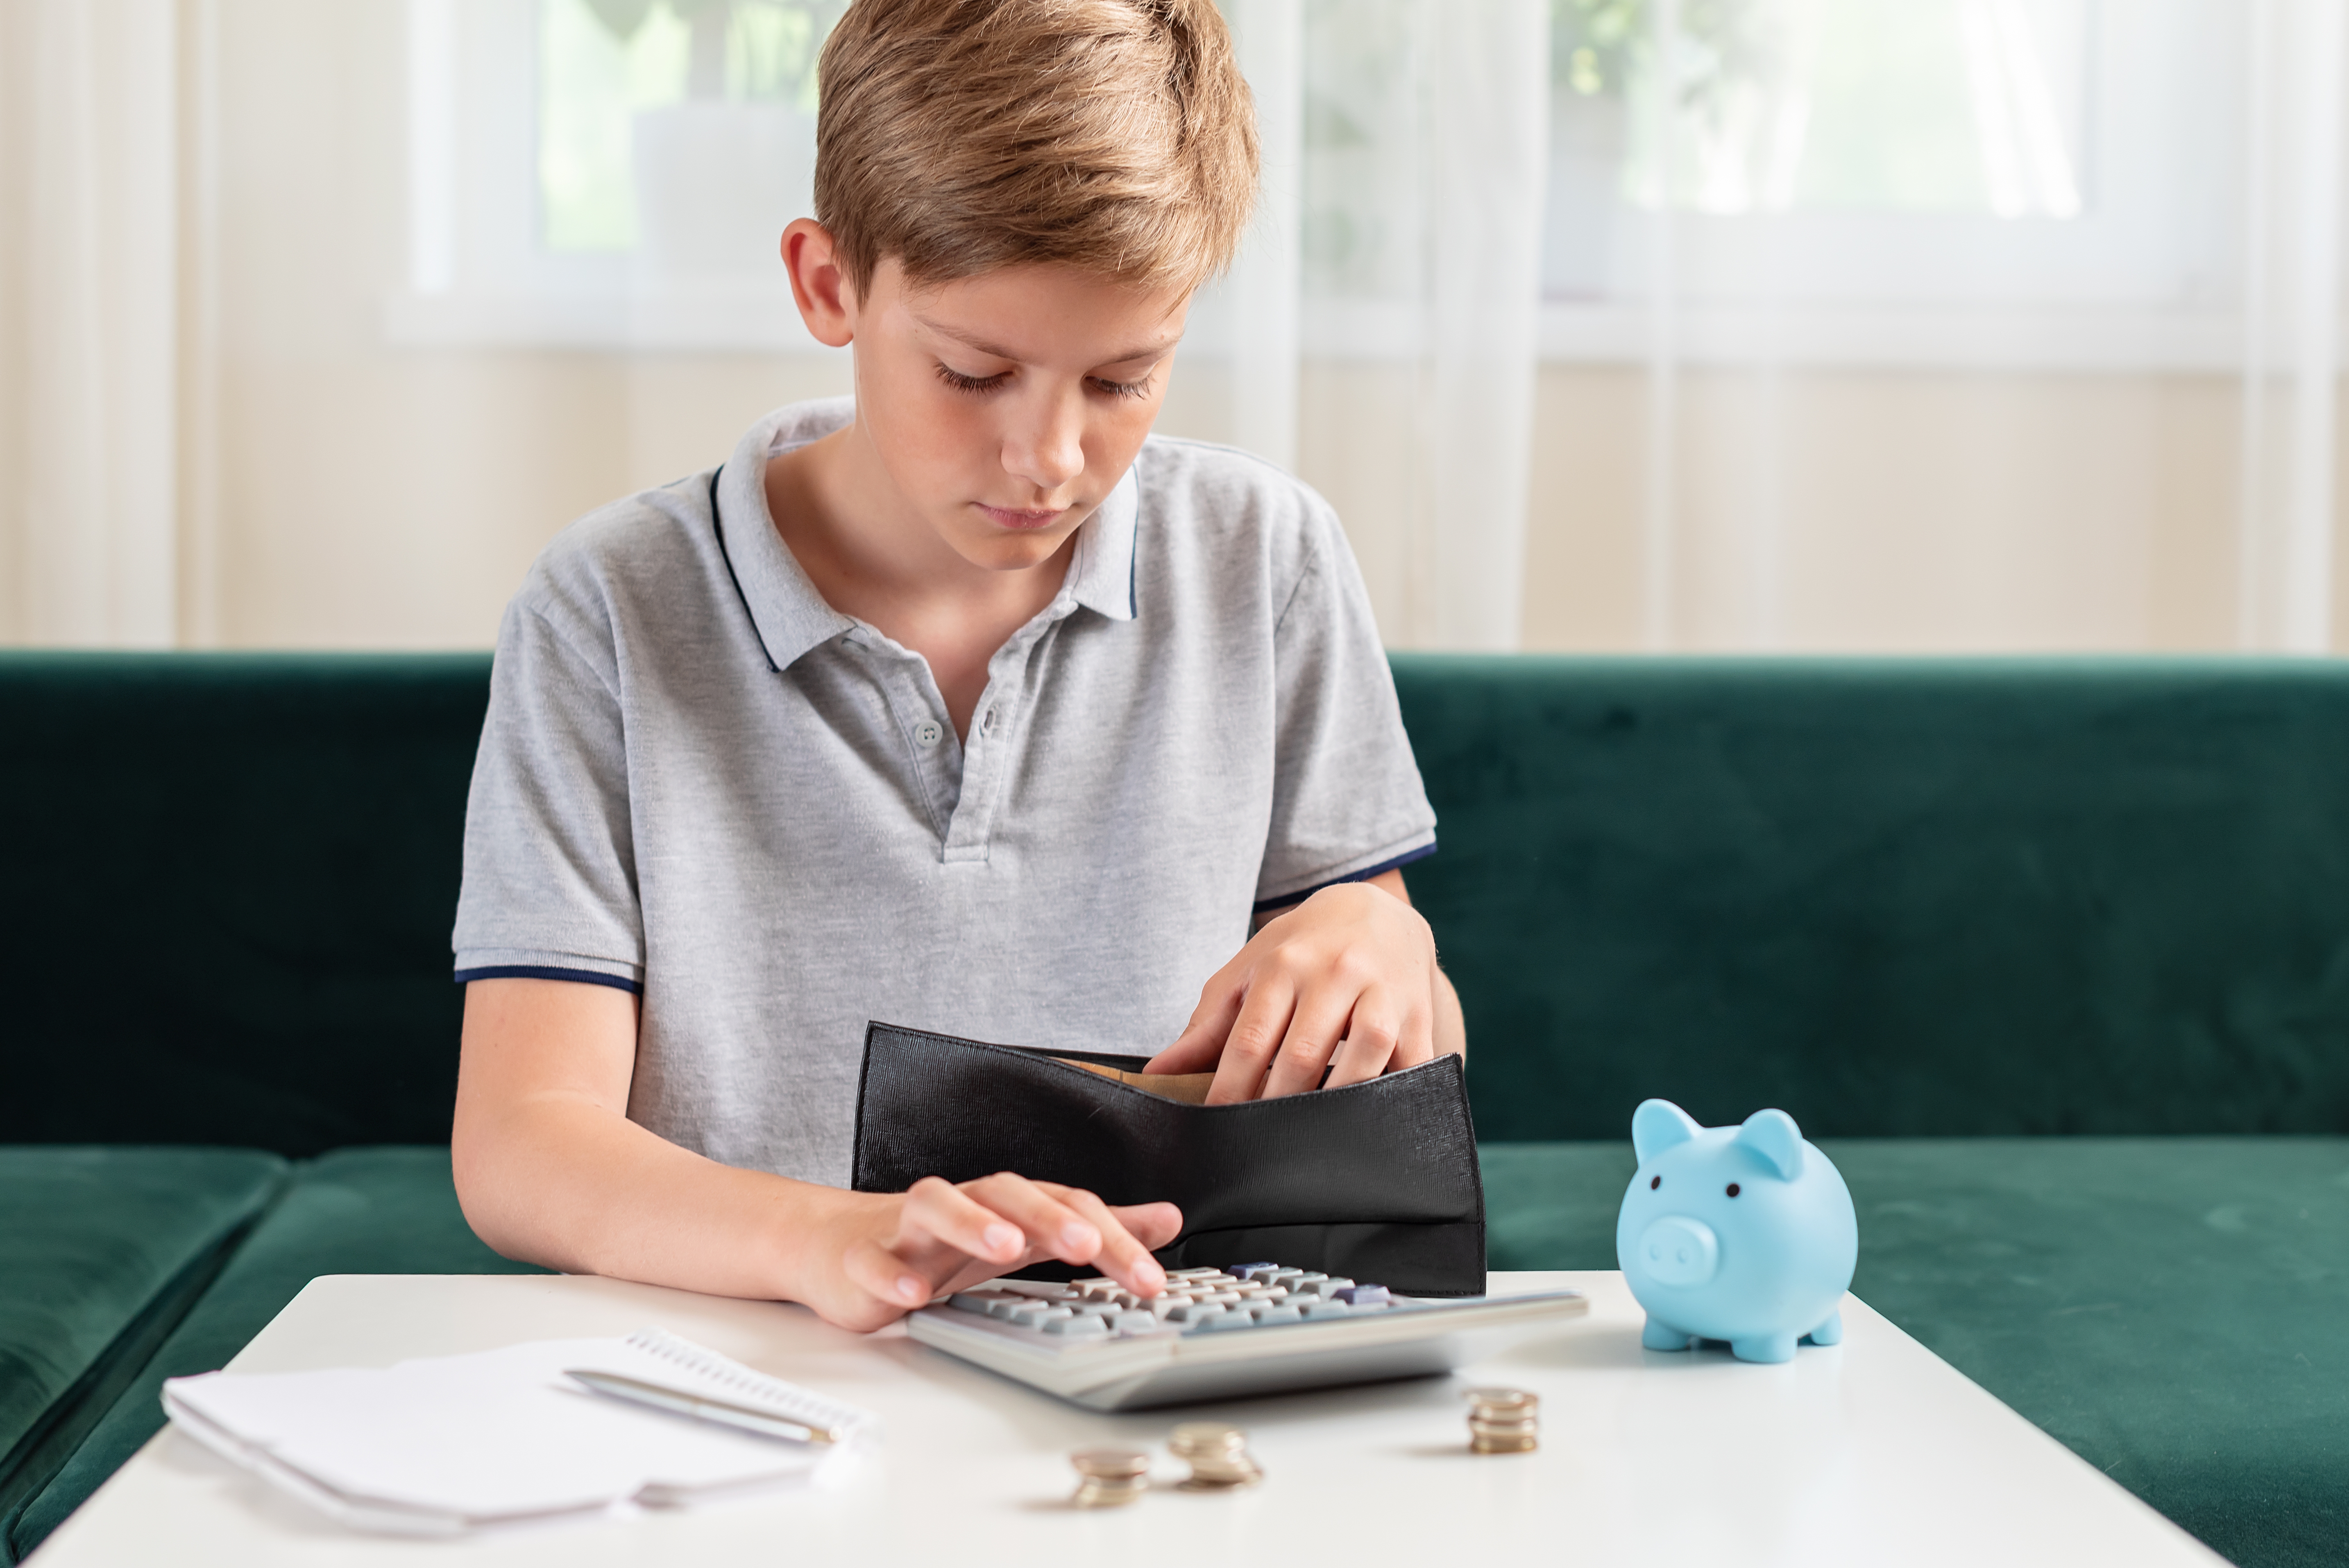 A young boy calculating his money | Source: Shutterstock